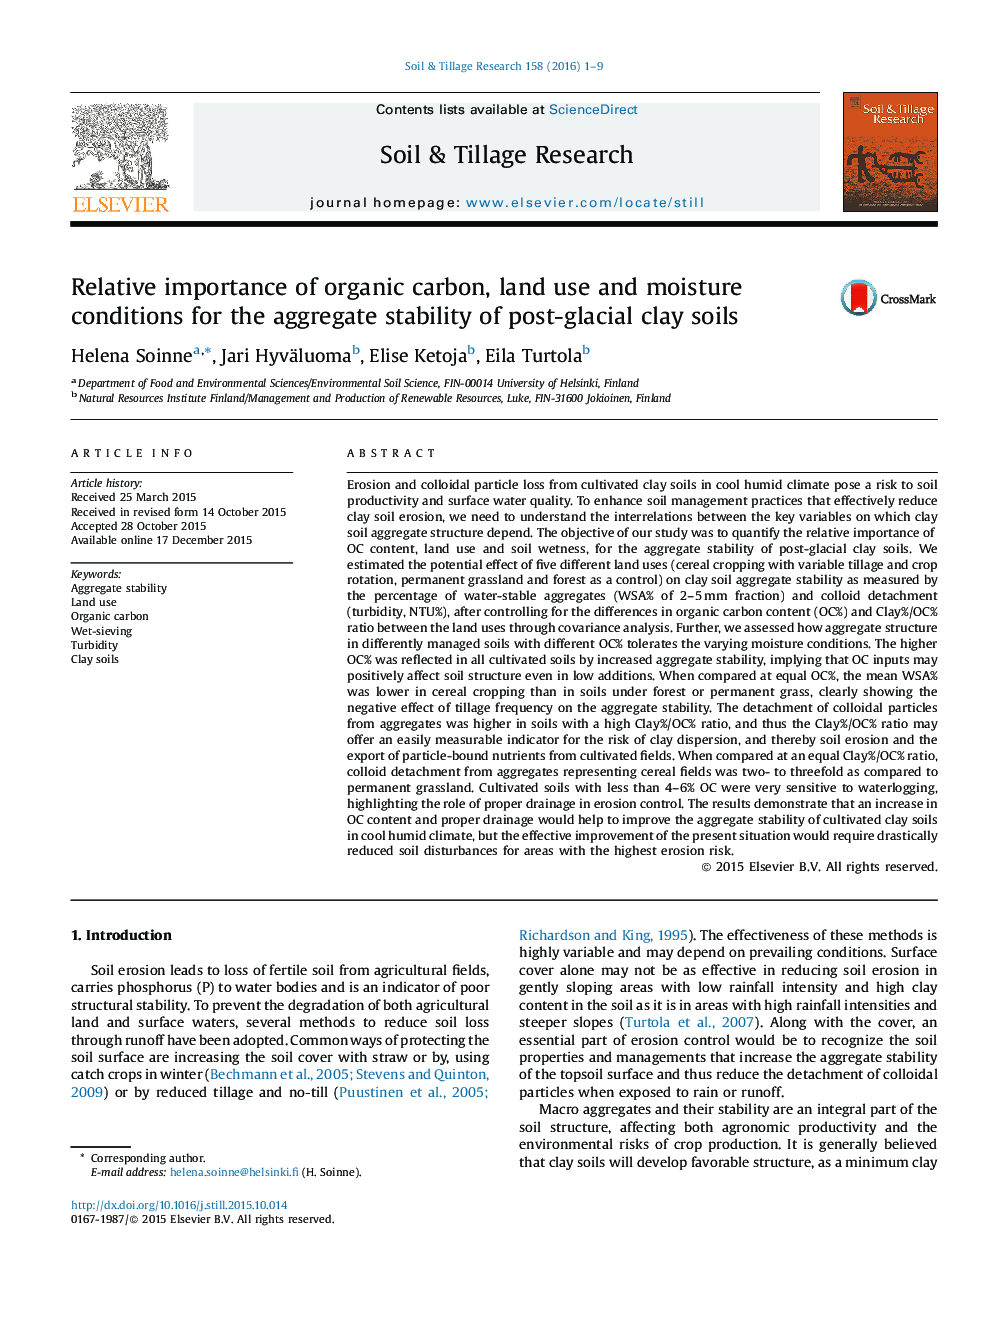 Relative importance of organic carbon, land use and moisture conditions for the aggregate stability of post-glacial clay soils